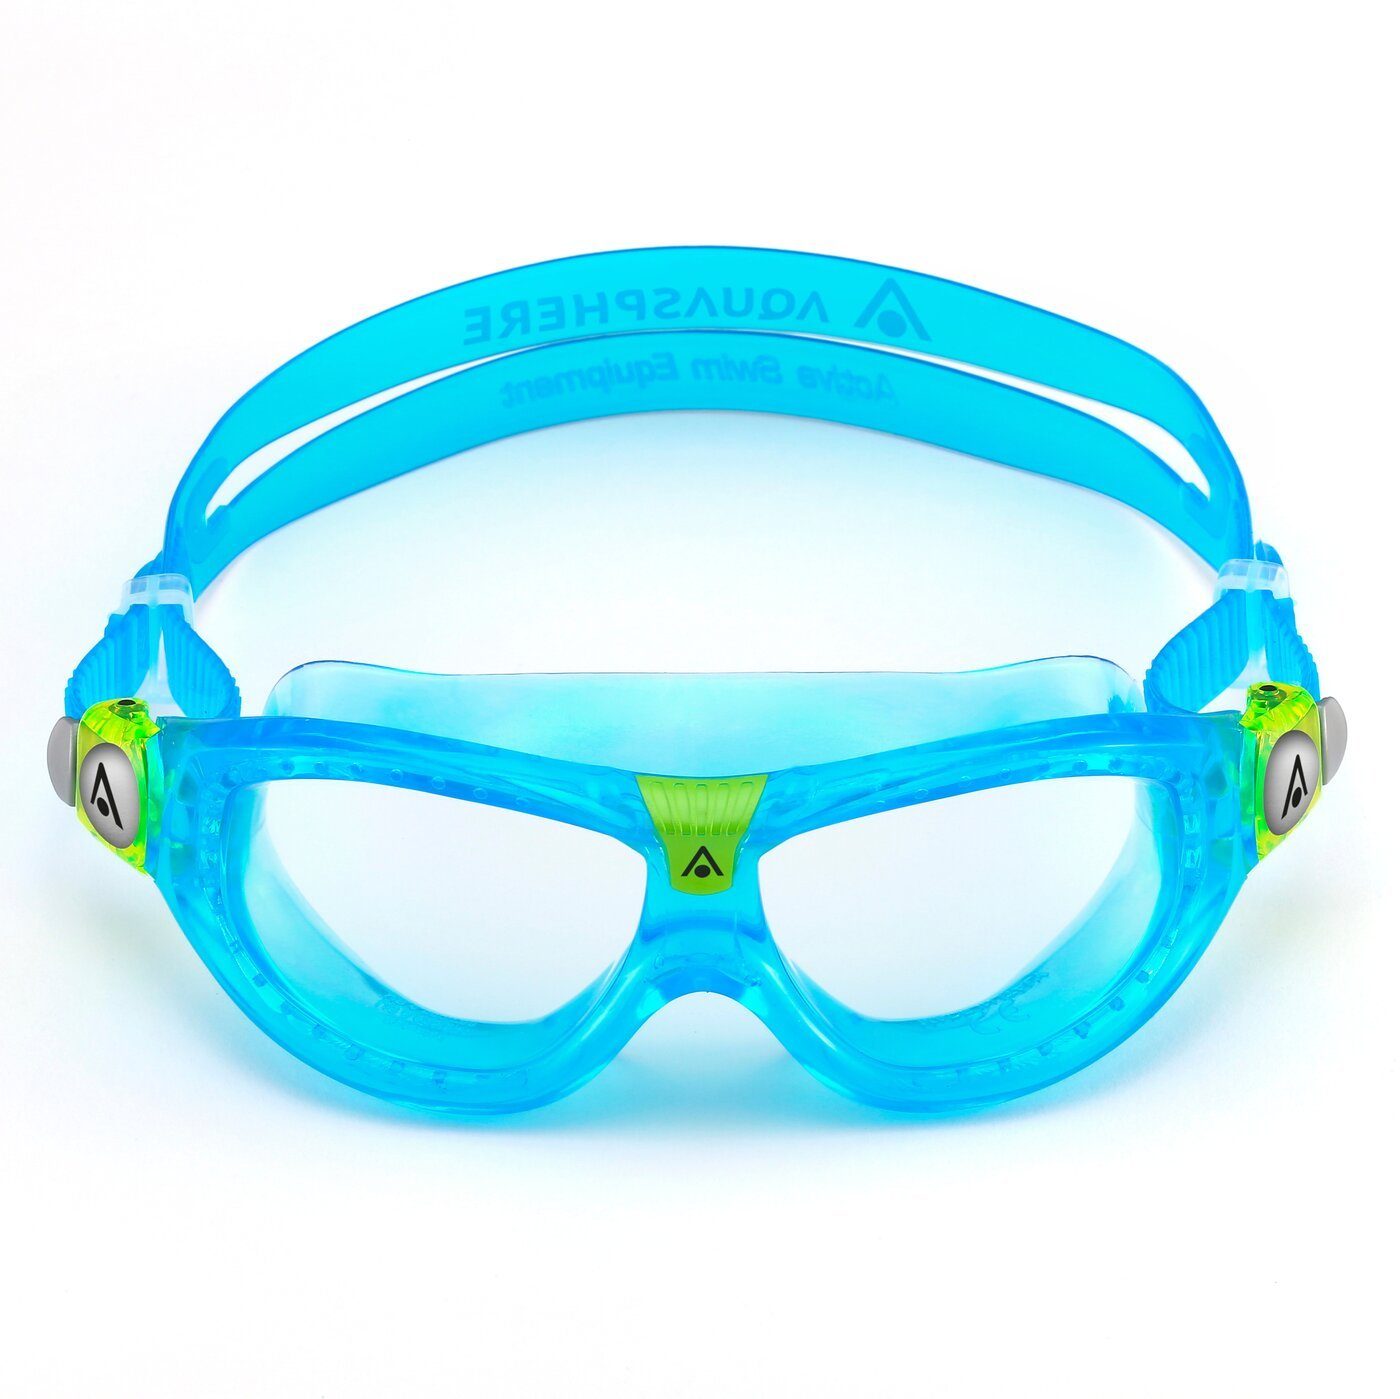 LEN SEAL 4343LC TURQUOISE Aquasphere 2 KID TURQUOISE Schwimmbrille